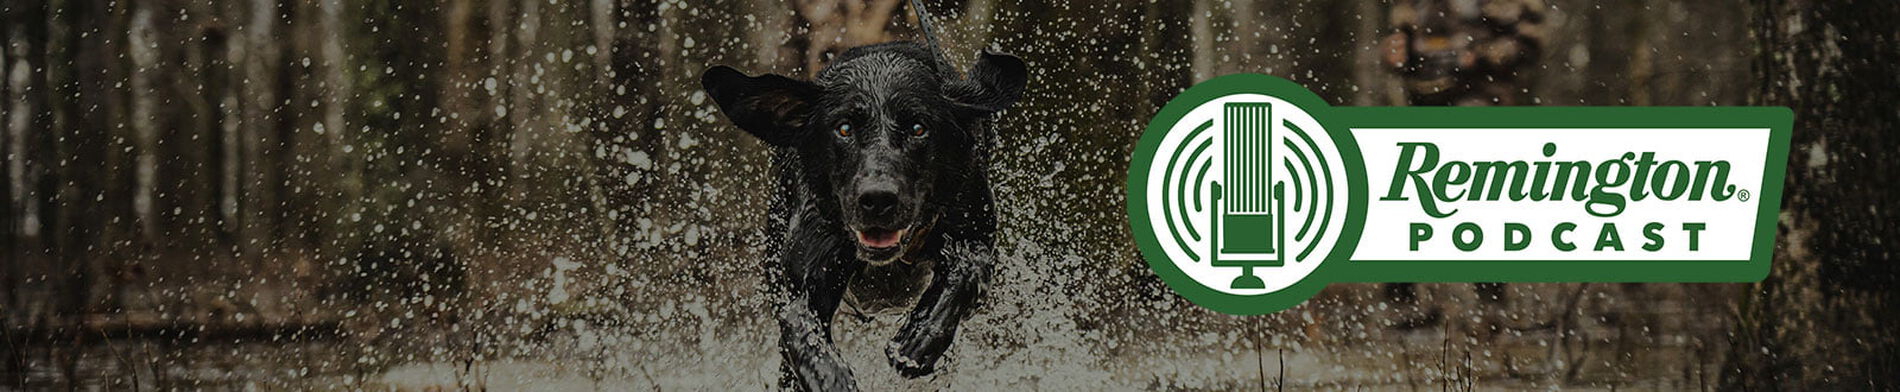 hunting dog running through water with the Remington Podcast logo